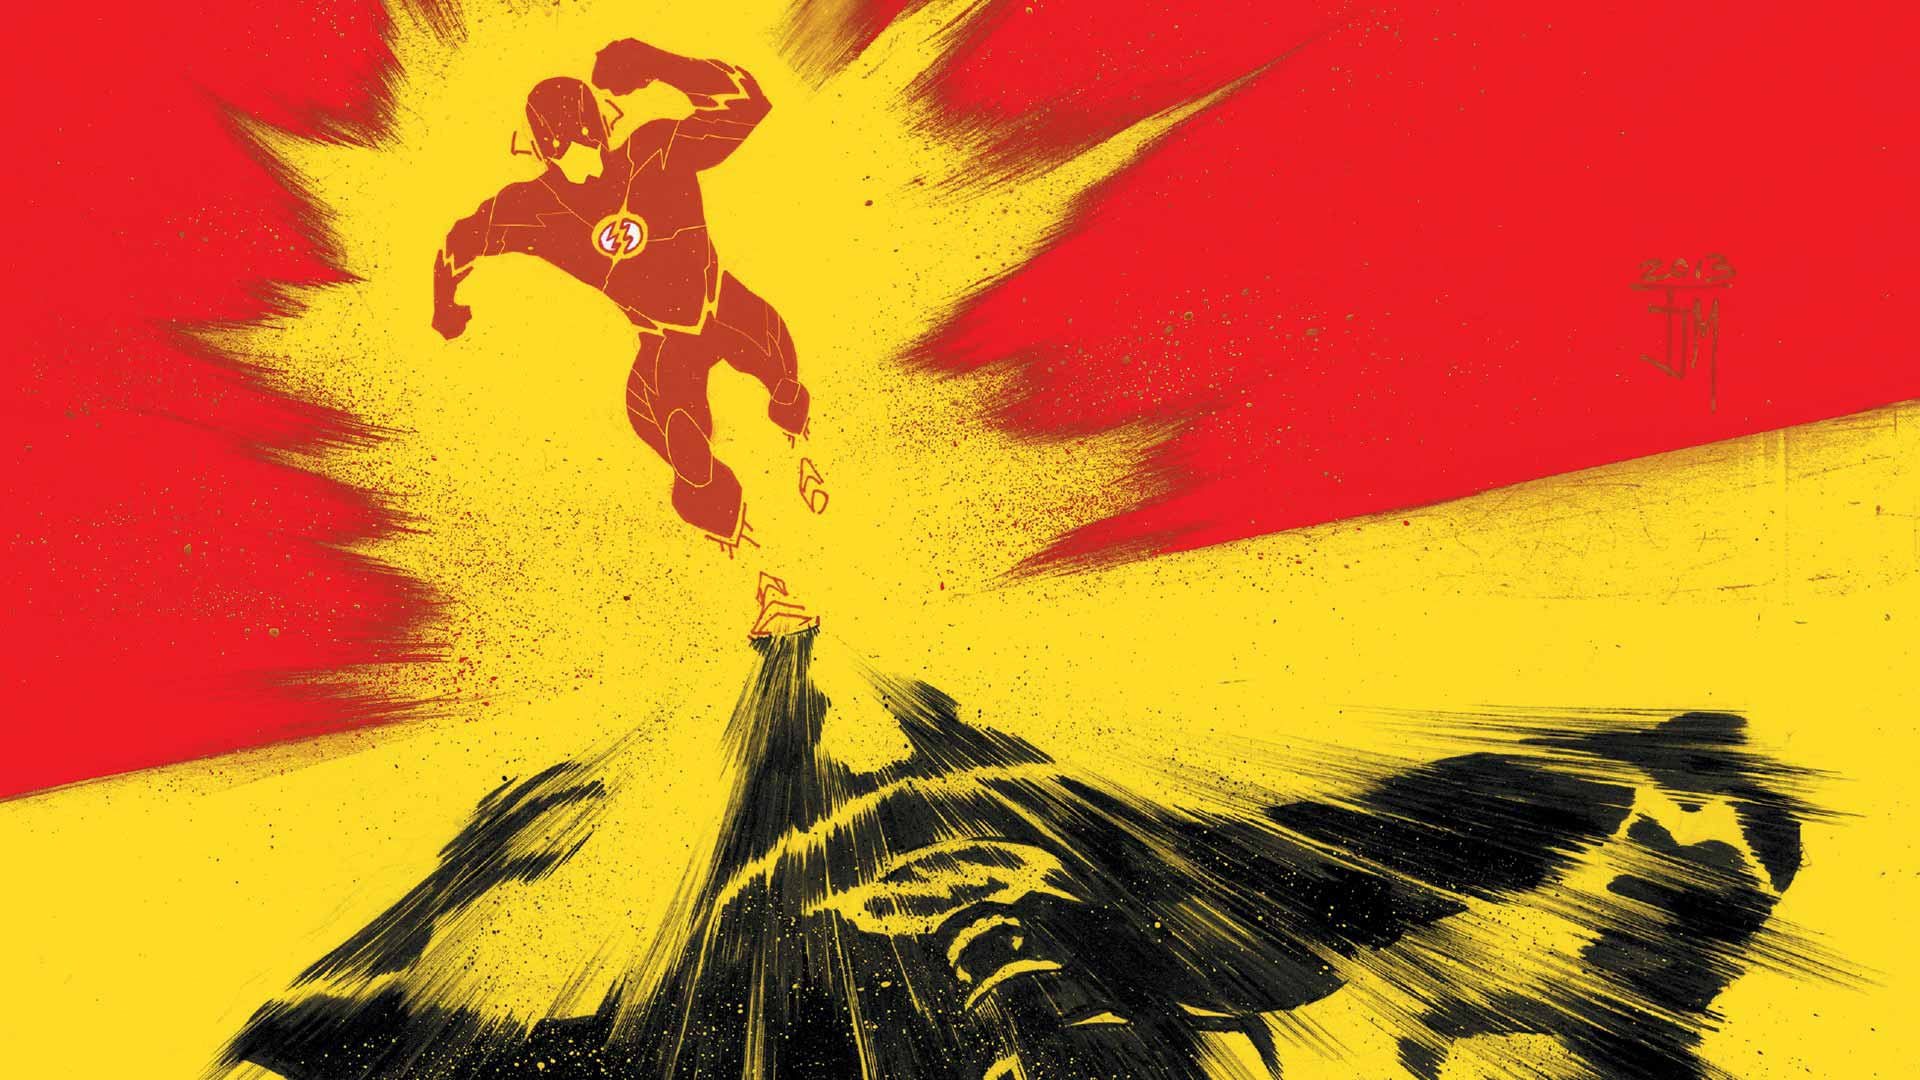 The Flash Volume 4 Reverse Review By Deffinition